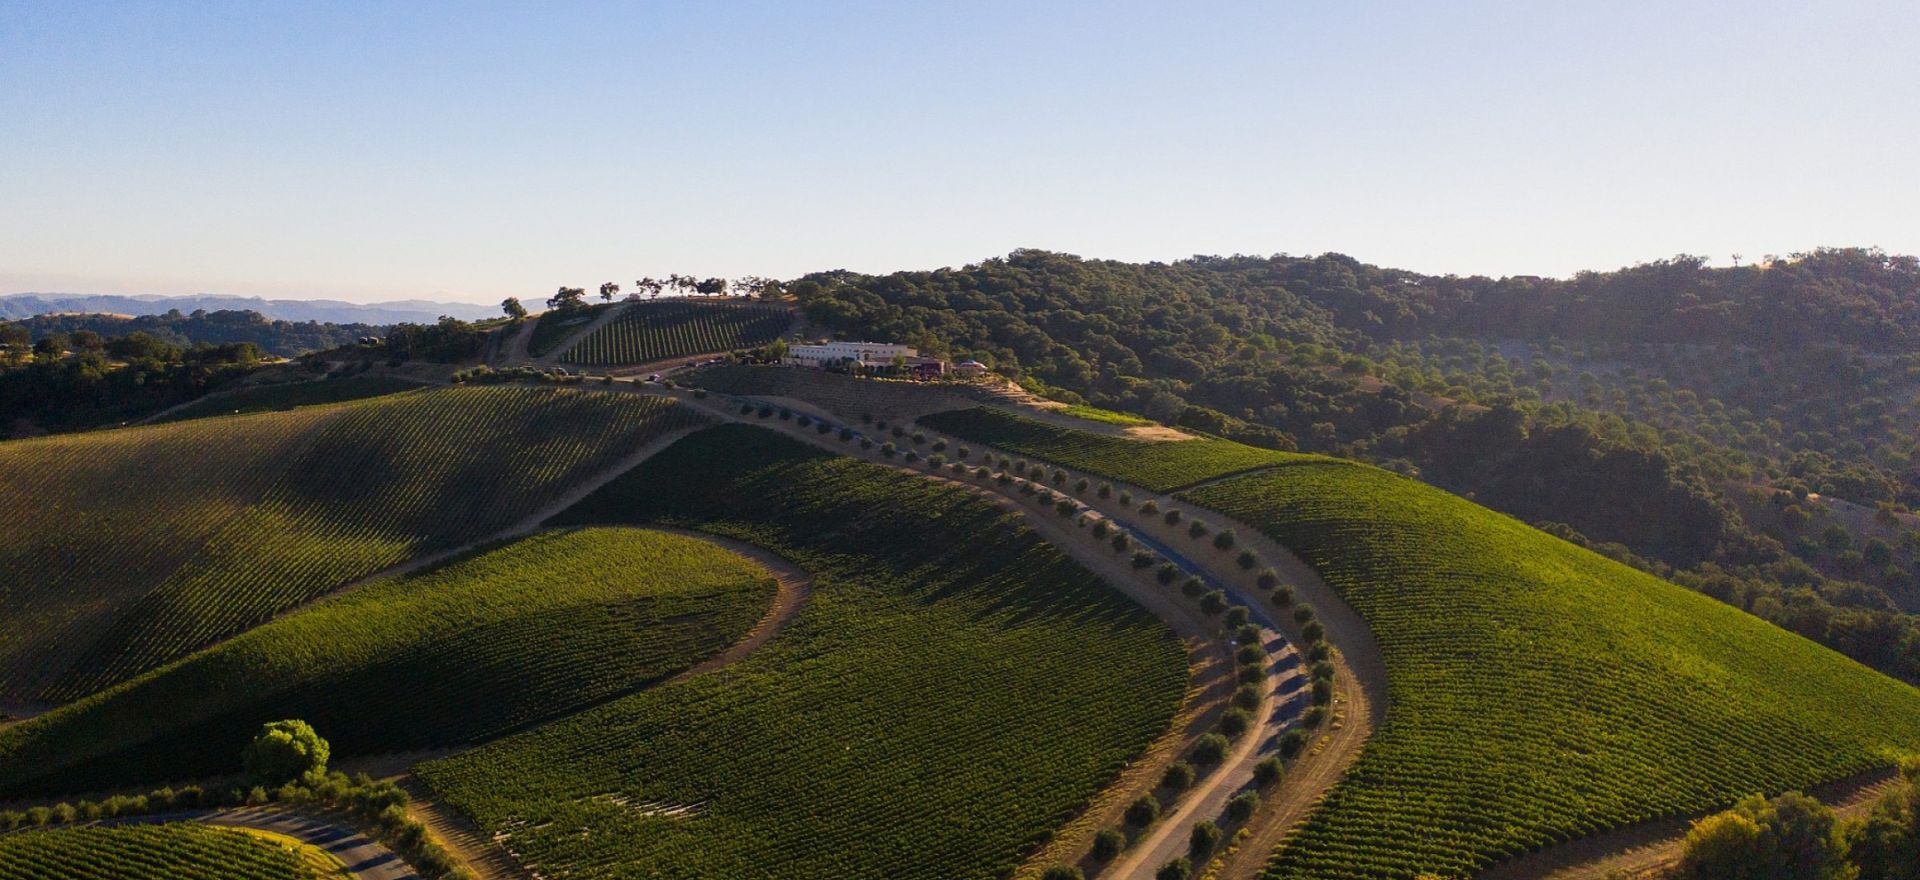 DAOU Vineyards – the Power of the Mountain